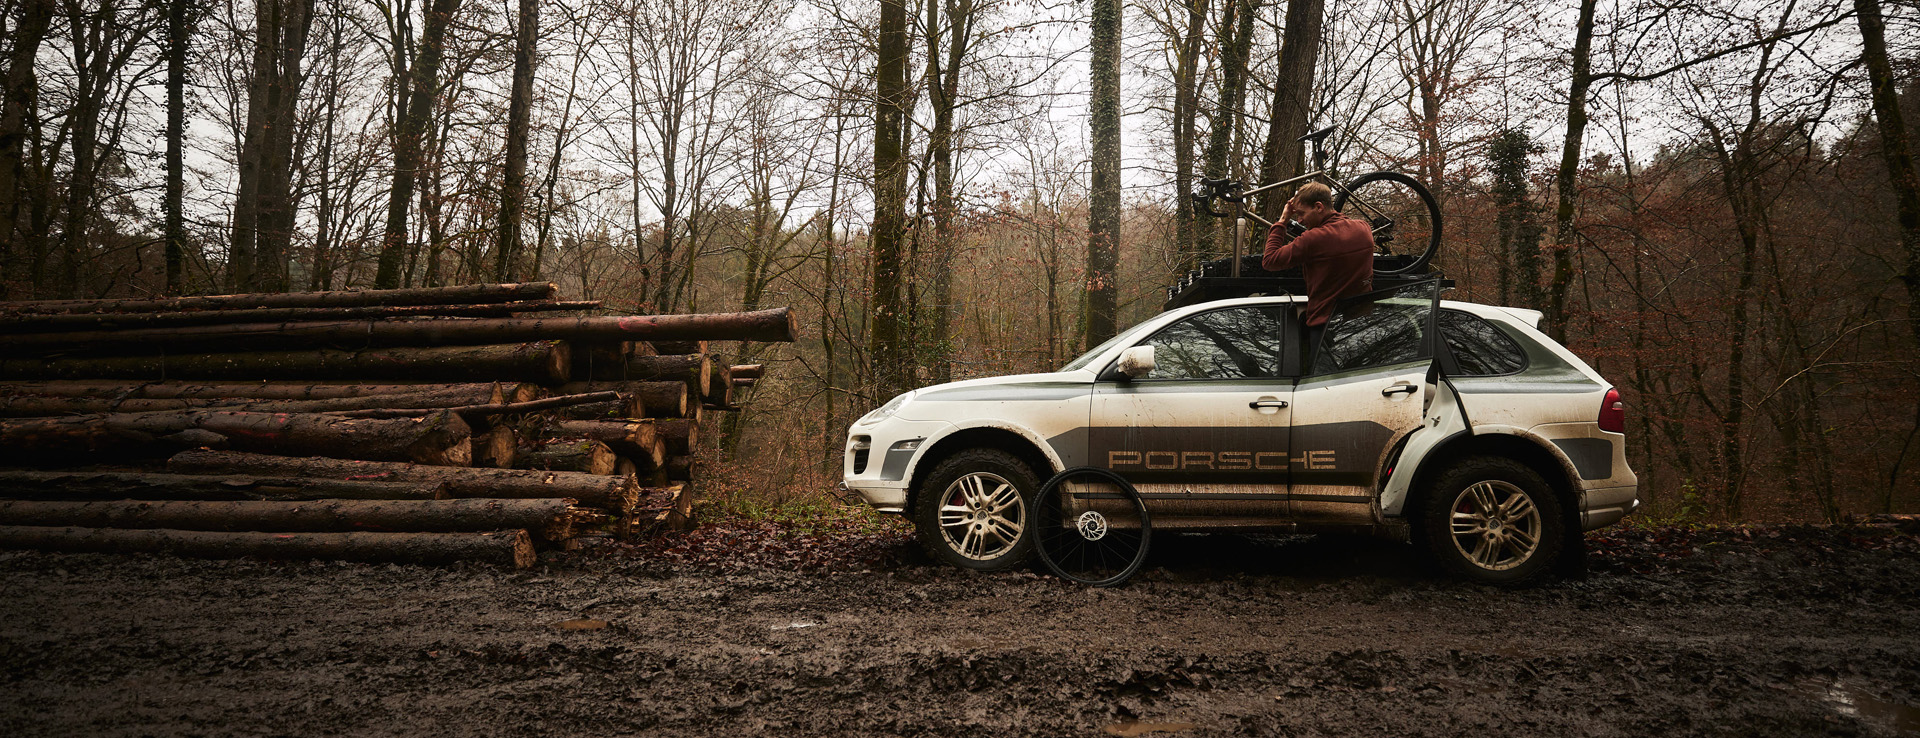 First-generation Cayenne with bike rack next to stack of logs